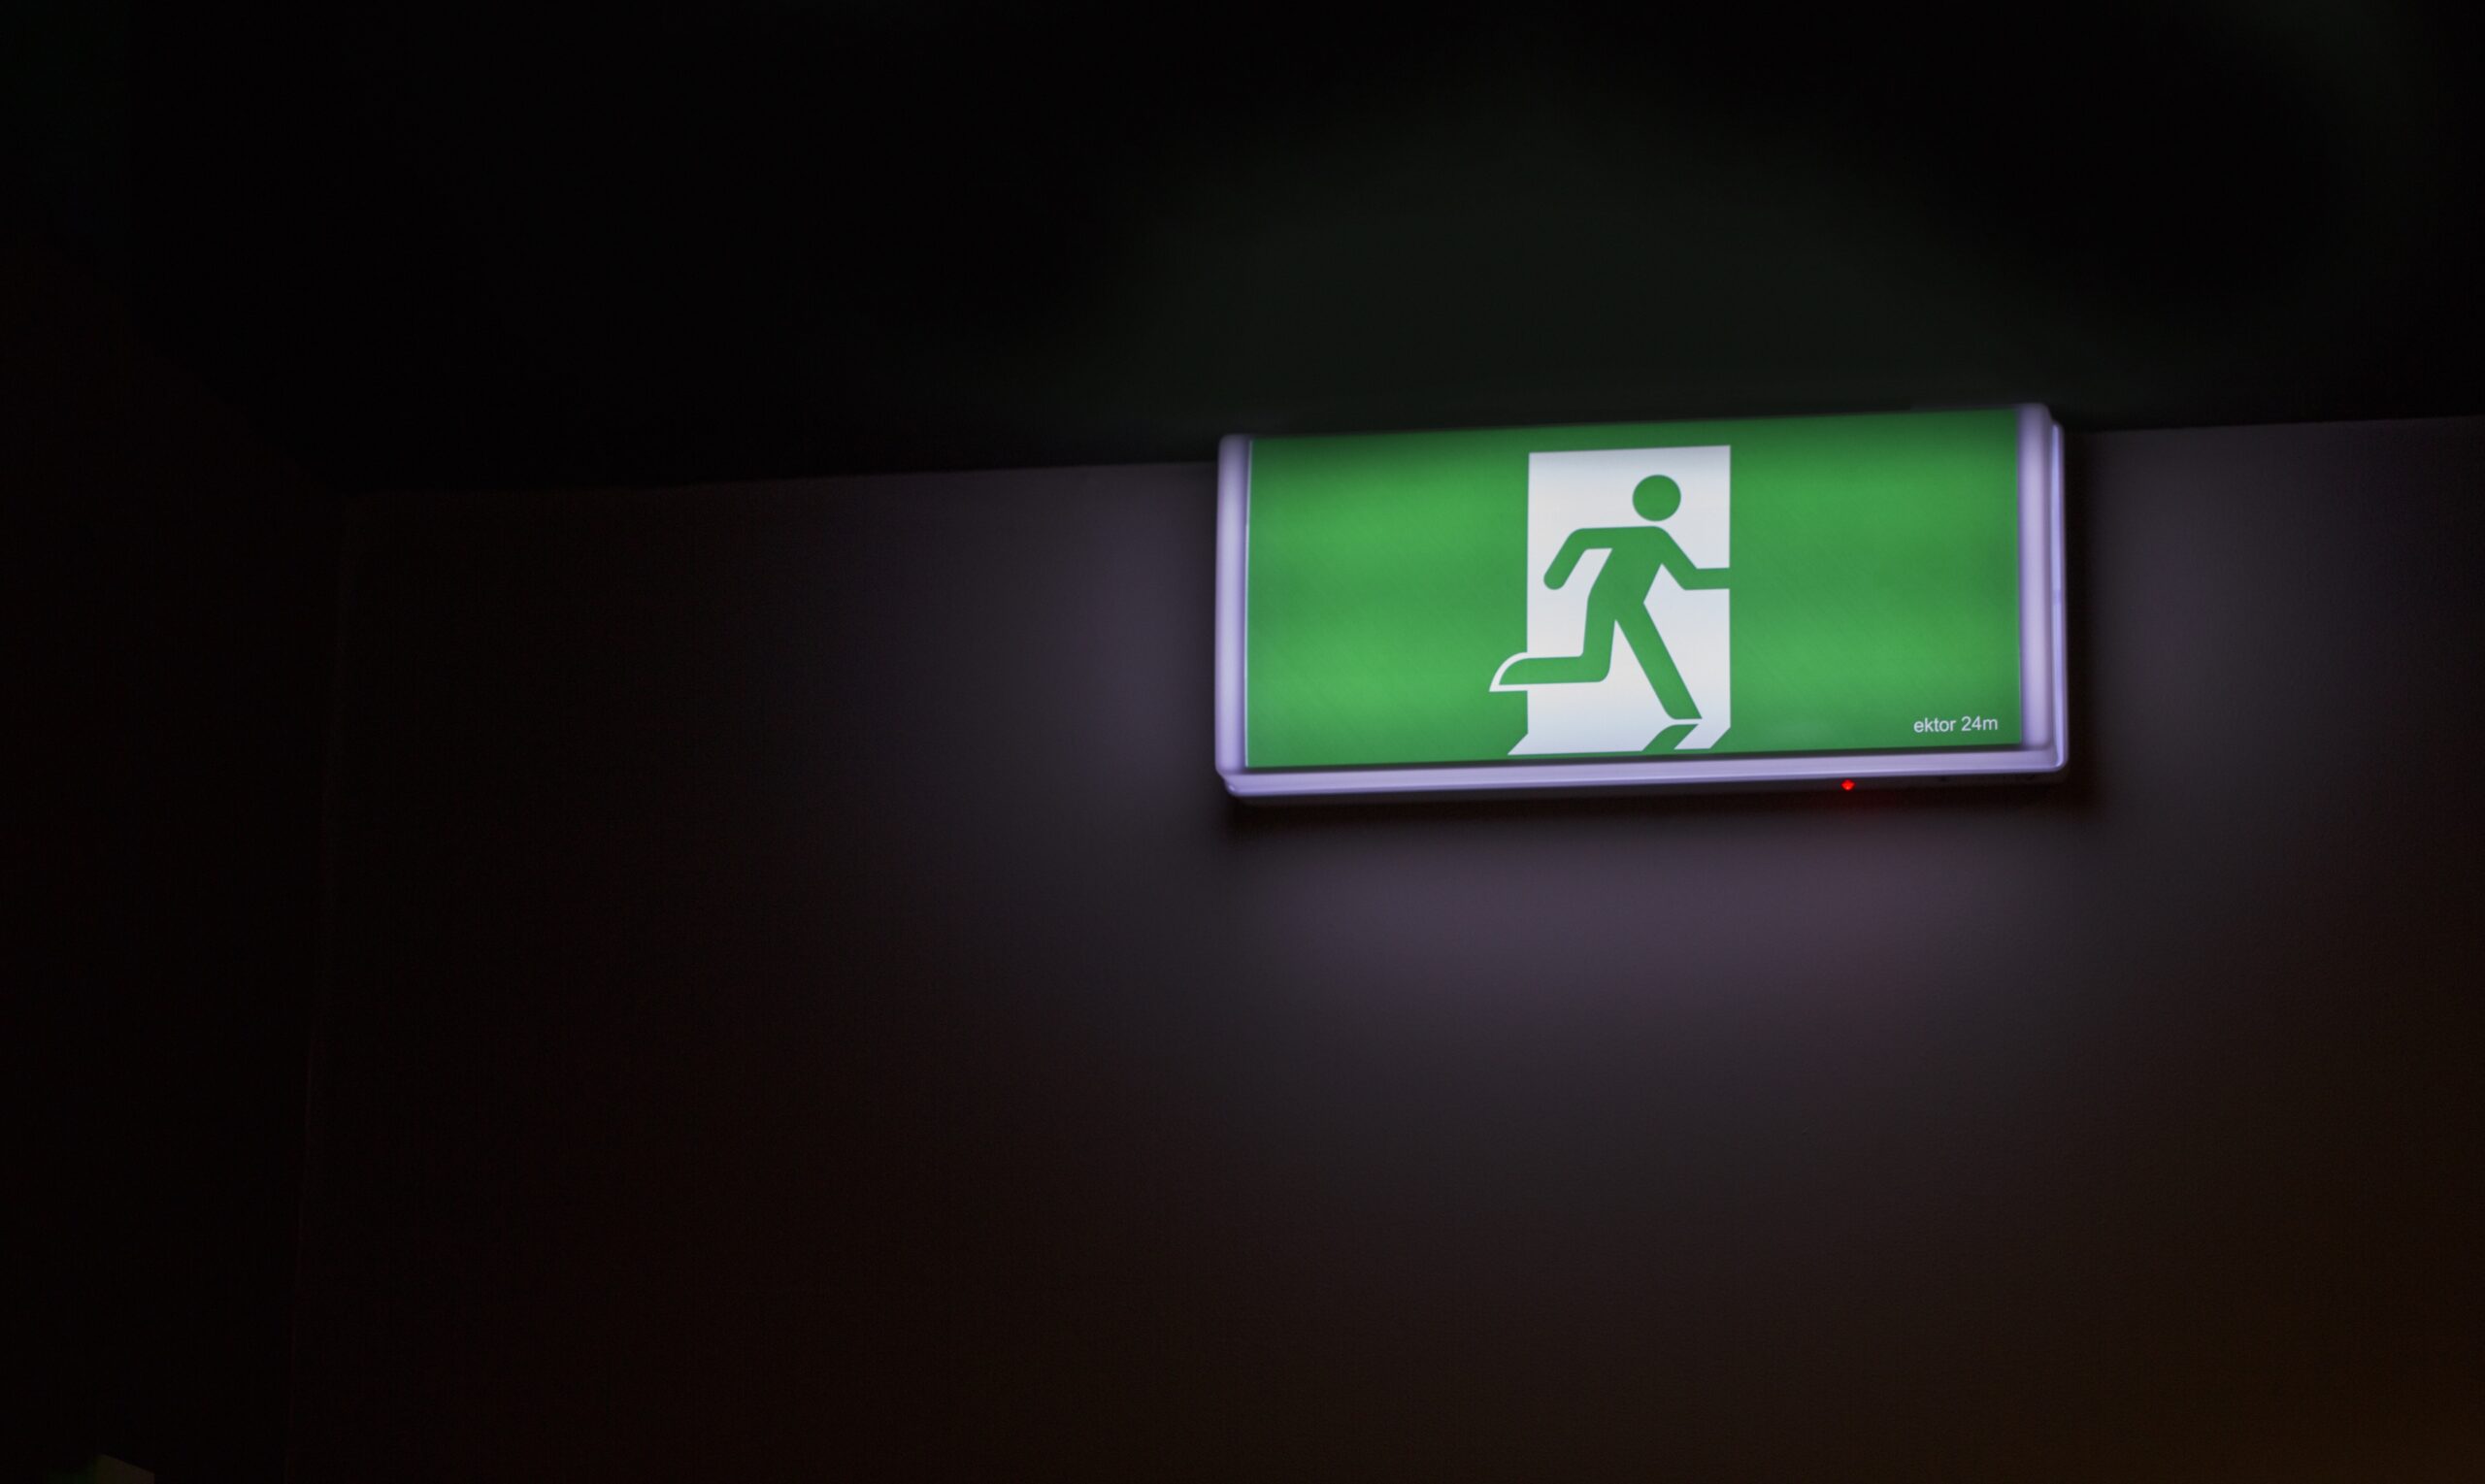 Does Your Property Need Emergency Lighting?